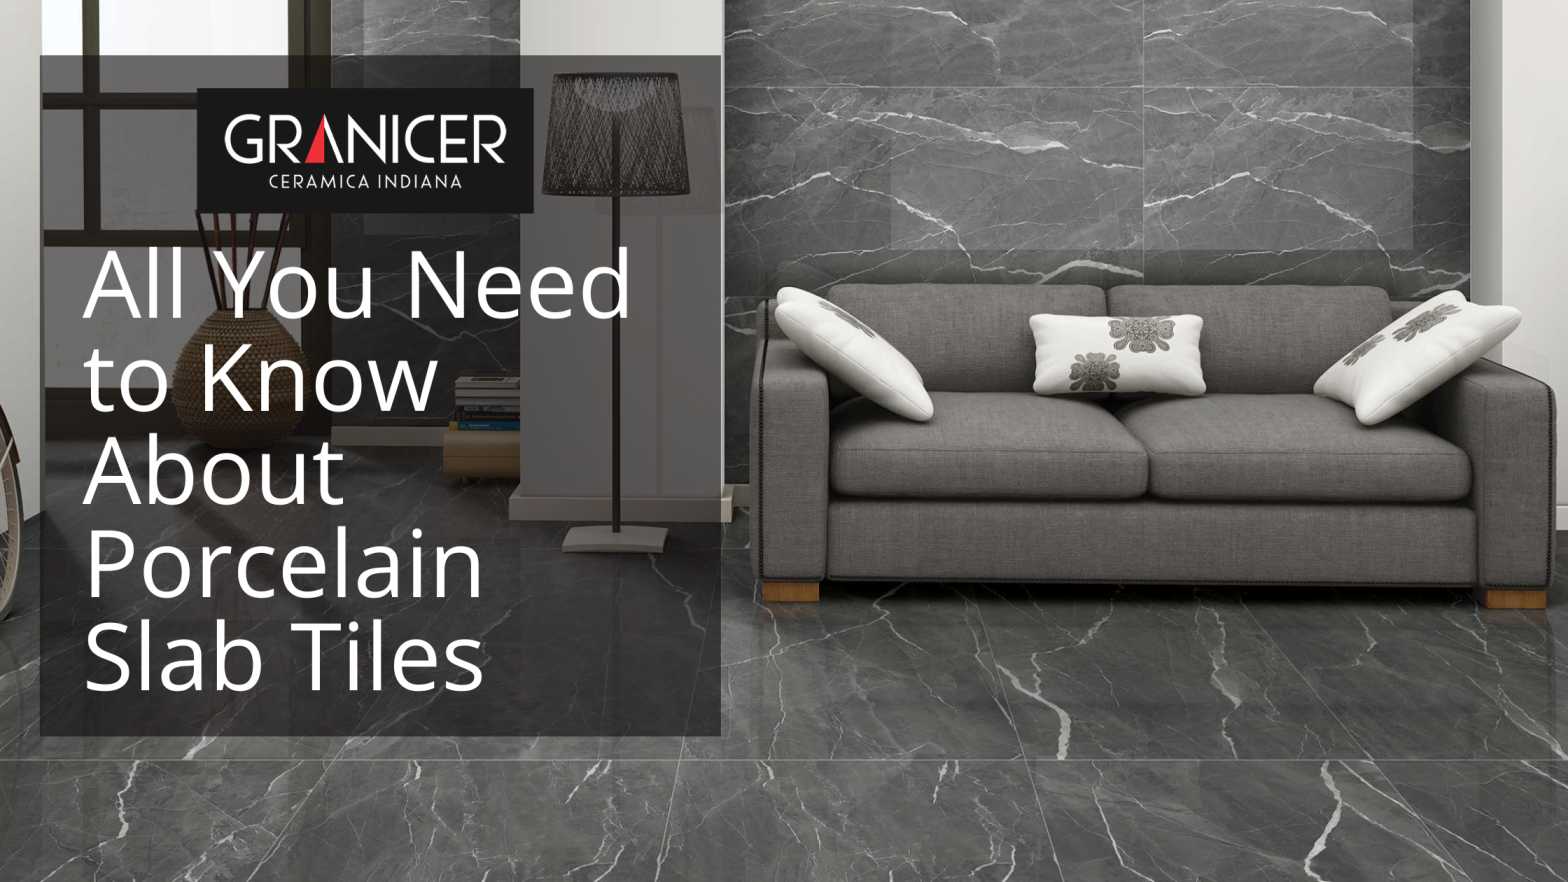 All You Need to Know About Porcelain Slab Tiles